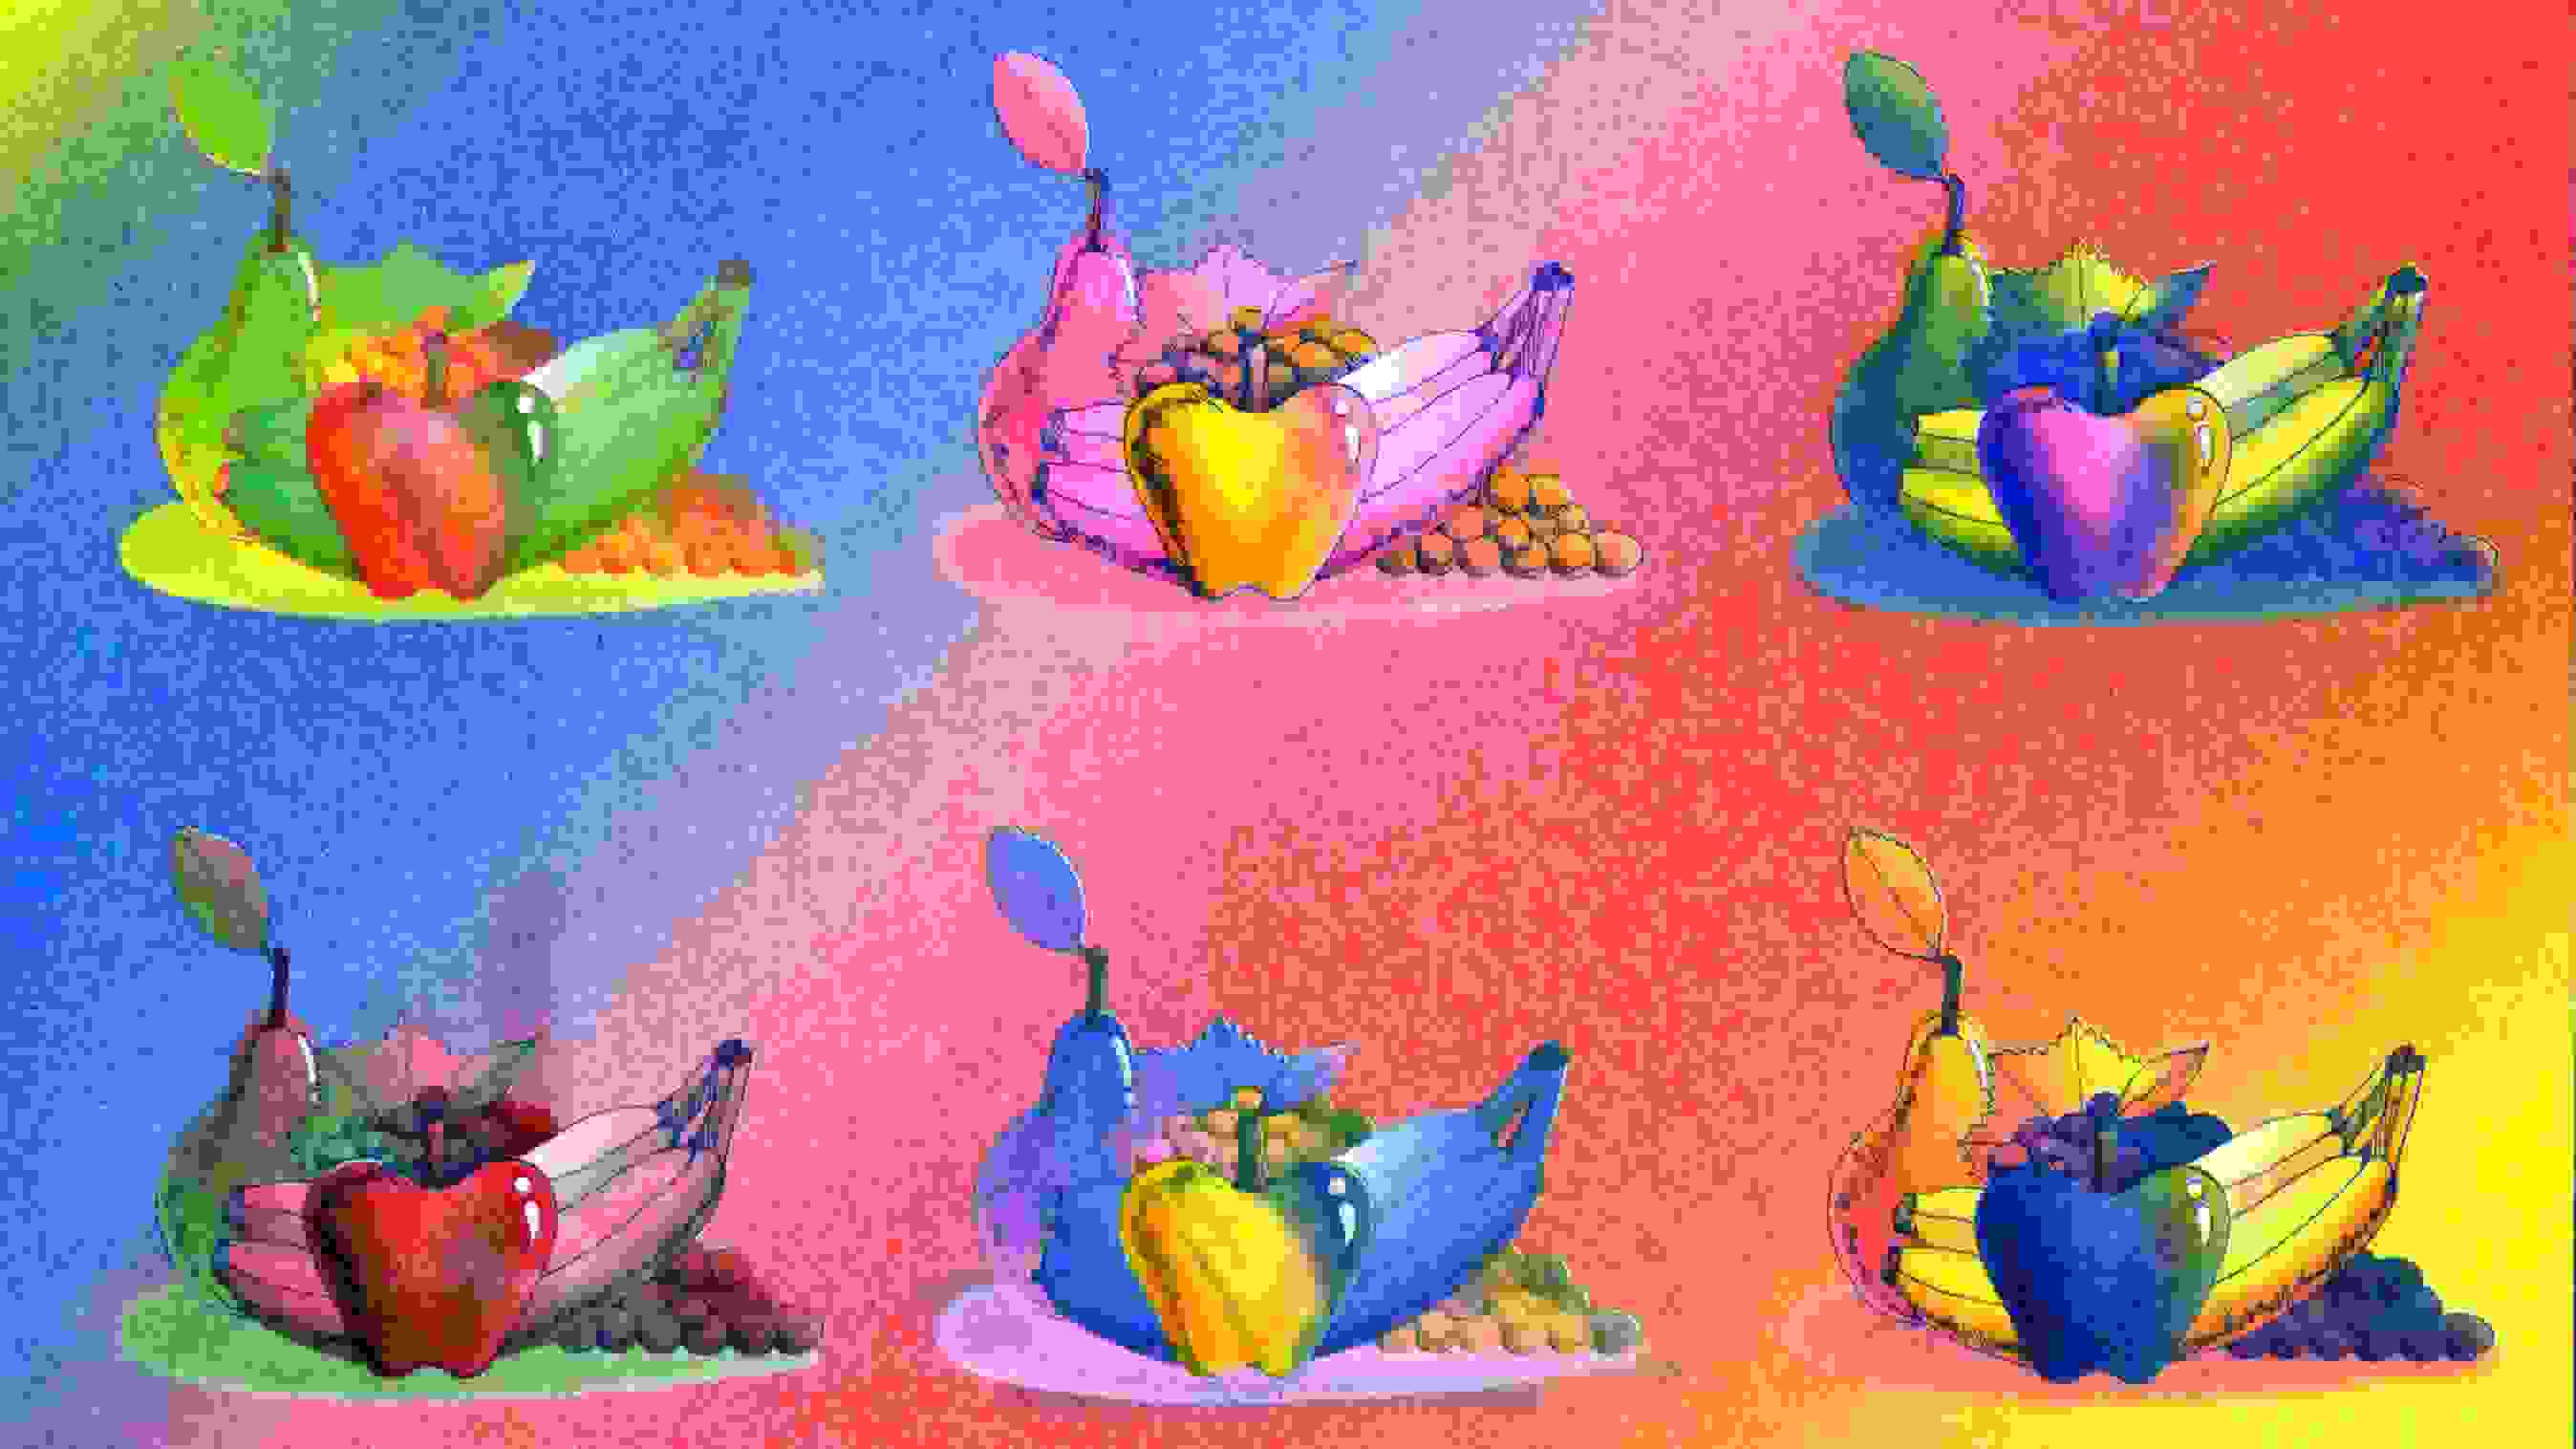 various versions of multicolored illustration of fruit arrangements.